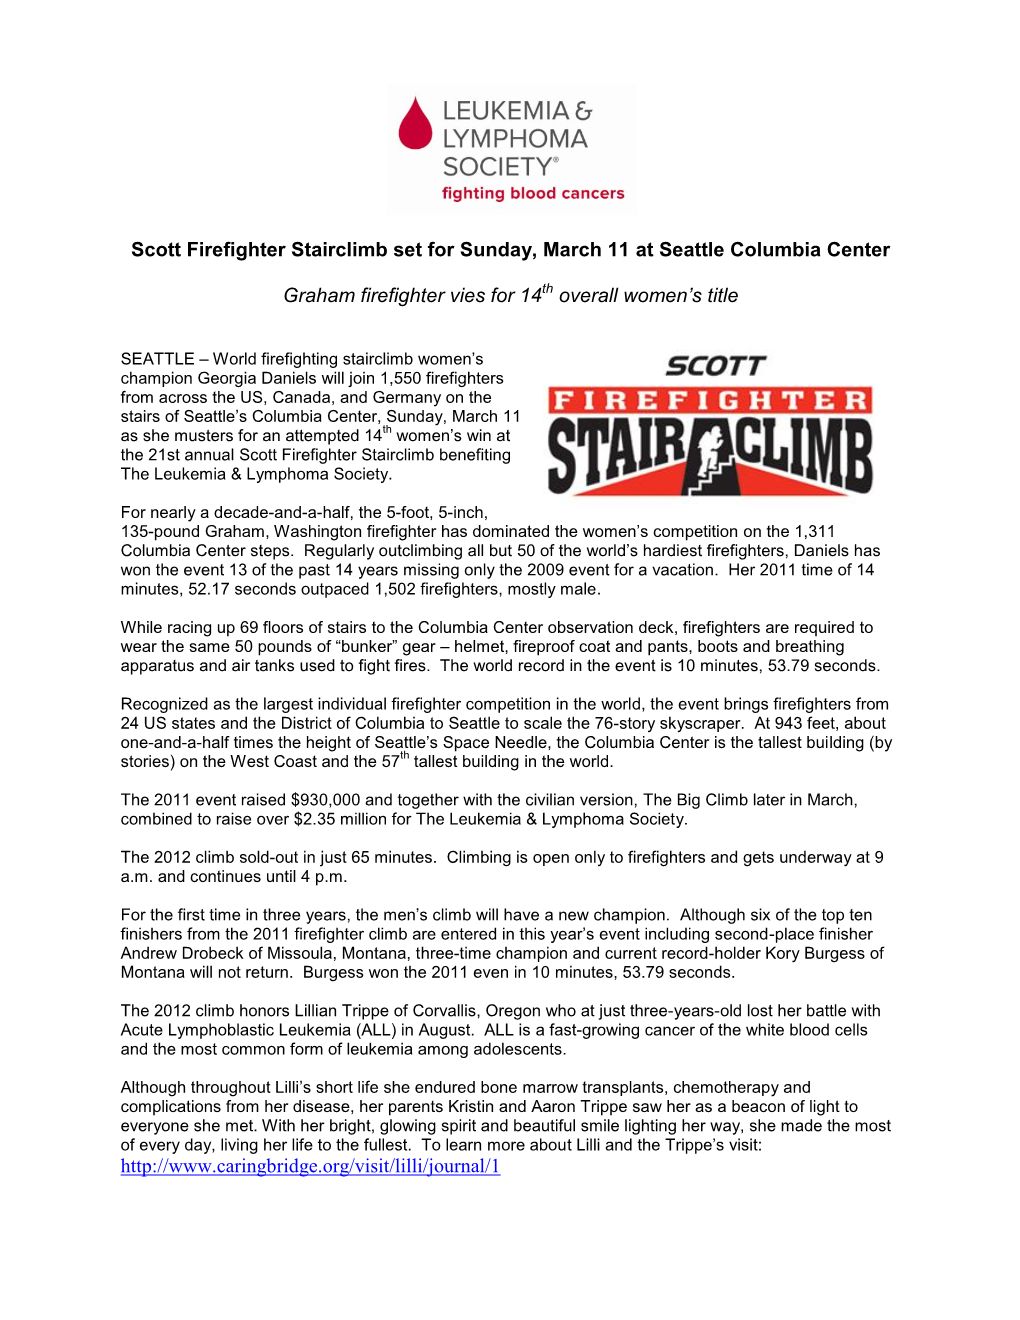 Scott Firefighter Stairclimb Set for Sunday, March 11 at Seattle Columbia Center